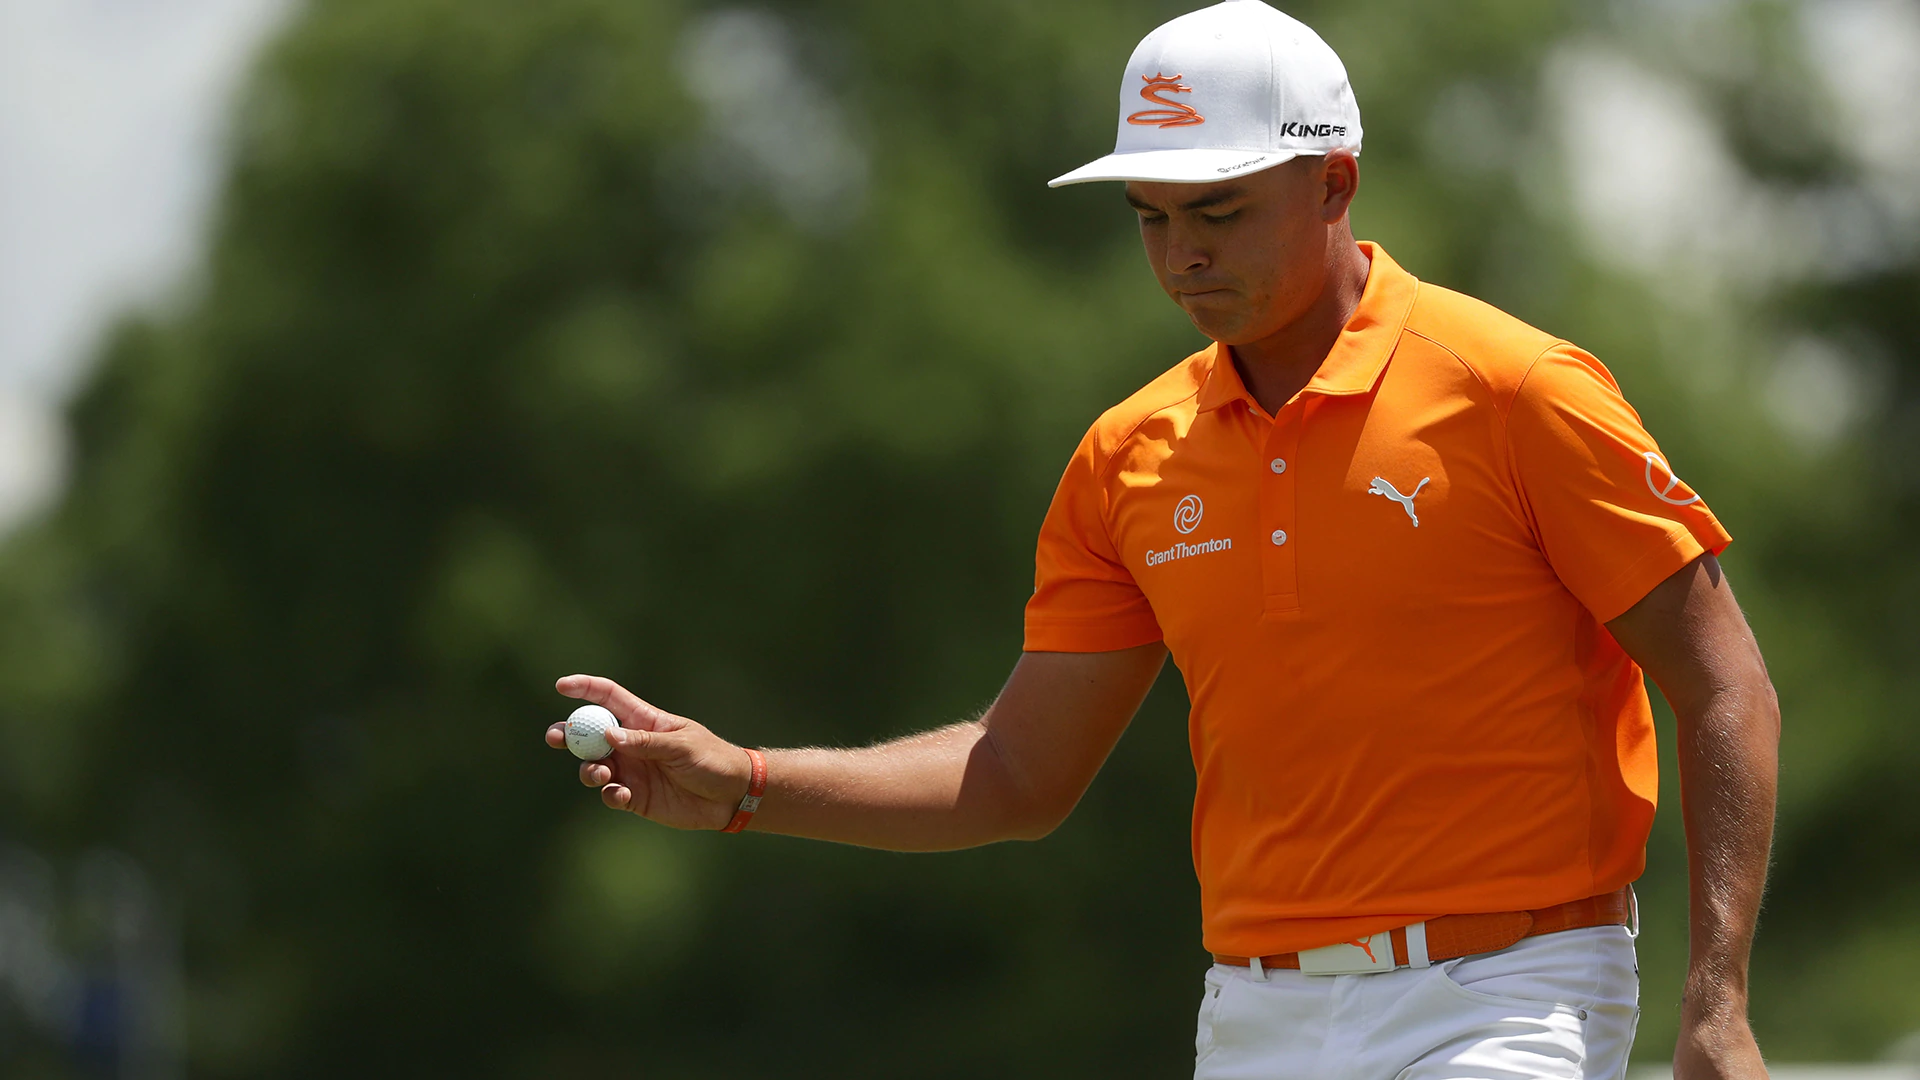 Watch: Fowler lips in 76-foot putt for eagle